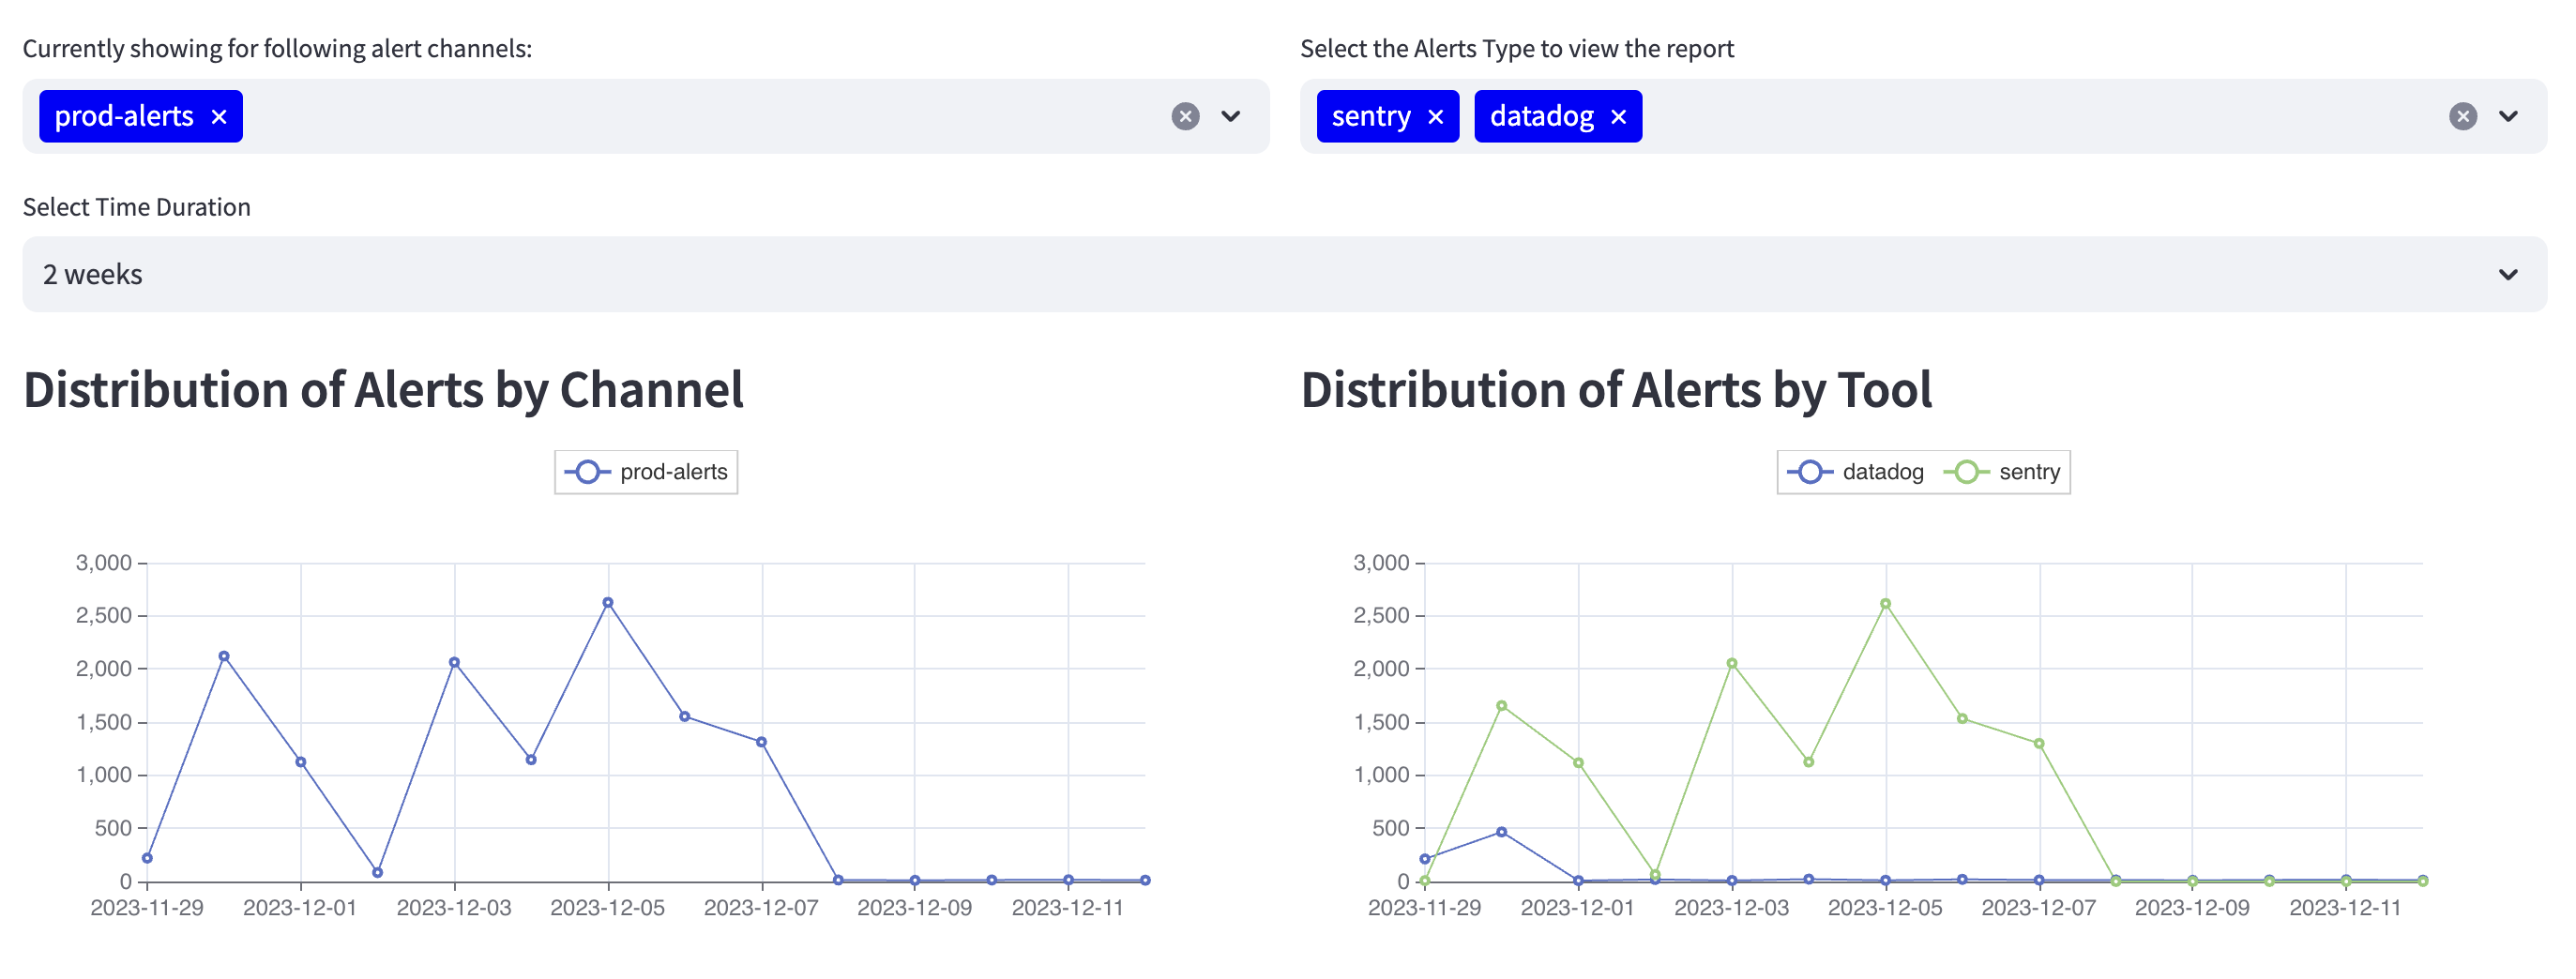 Distribution of alerts across slack channels and source

